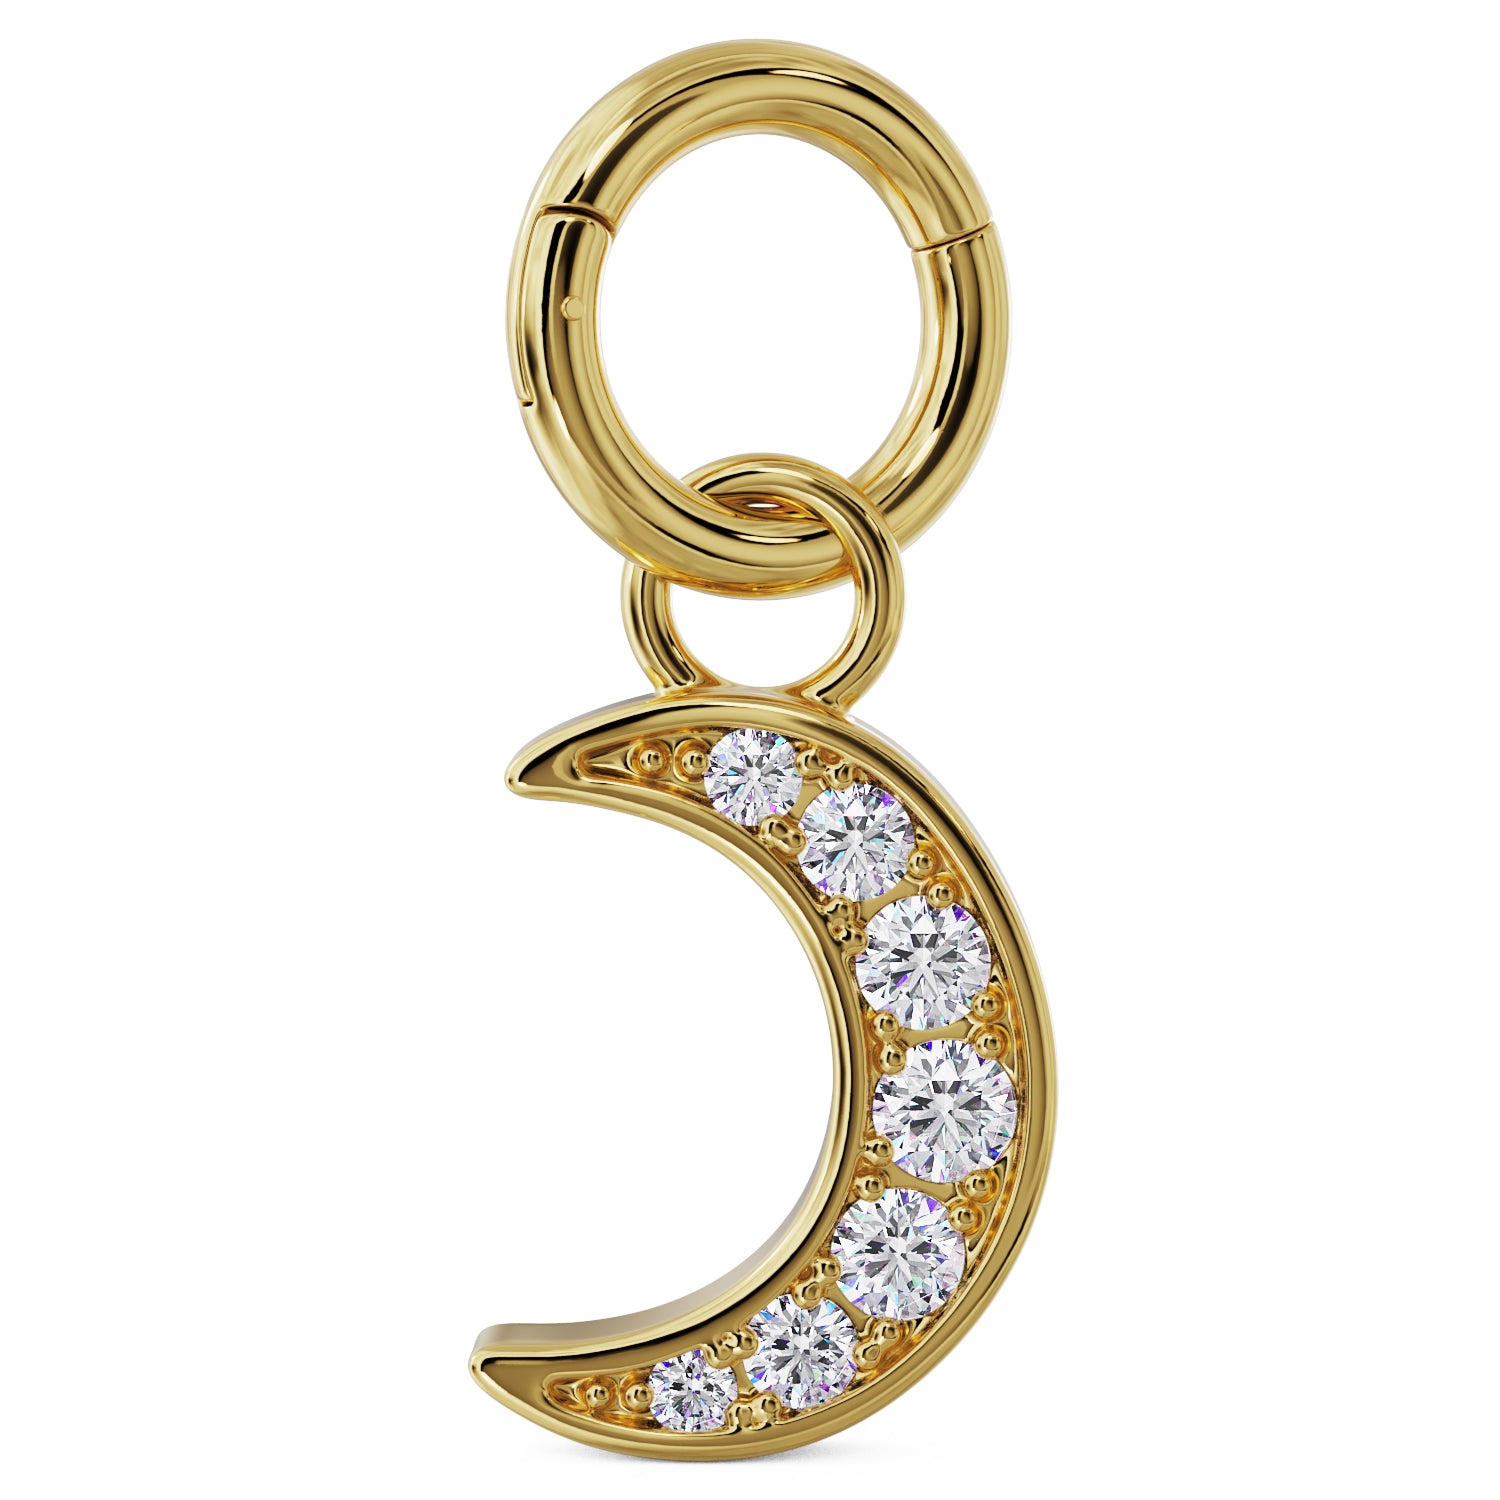 Clicker Ring - 14k Gold - Moon Diamond Pave Charm Accessory for Piercing Jewelry